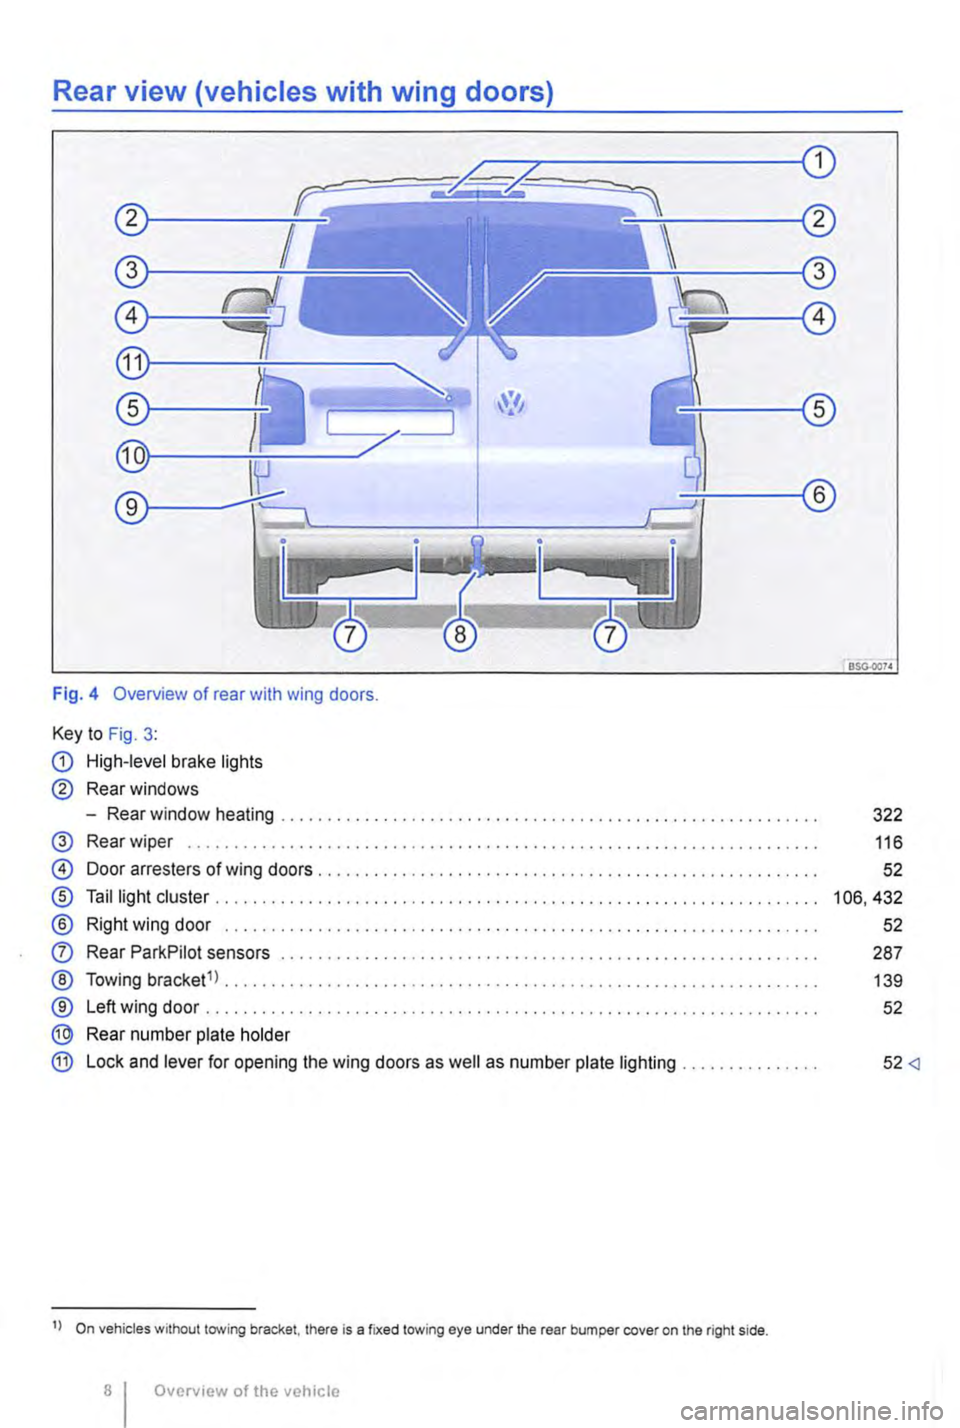 VOLKSWAGEN TRANSPORTER 2015  Owner´s Manual Rear view (vehicles with wing doors) 
Fig. 4 Overview of rear with wing doors. 
Key to Fig. 3: 
G) High-level brake lights 
® Rear windows 
-Rear window heating ......................................